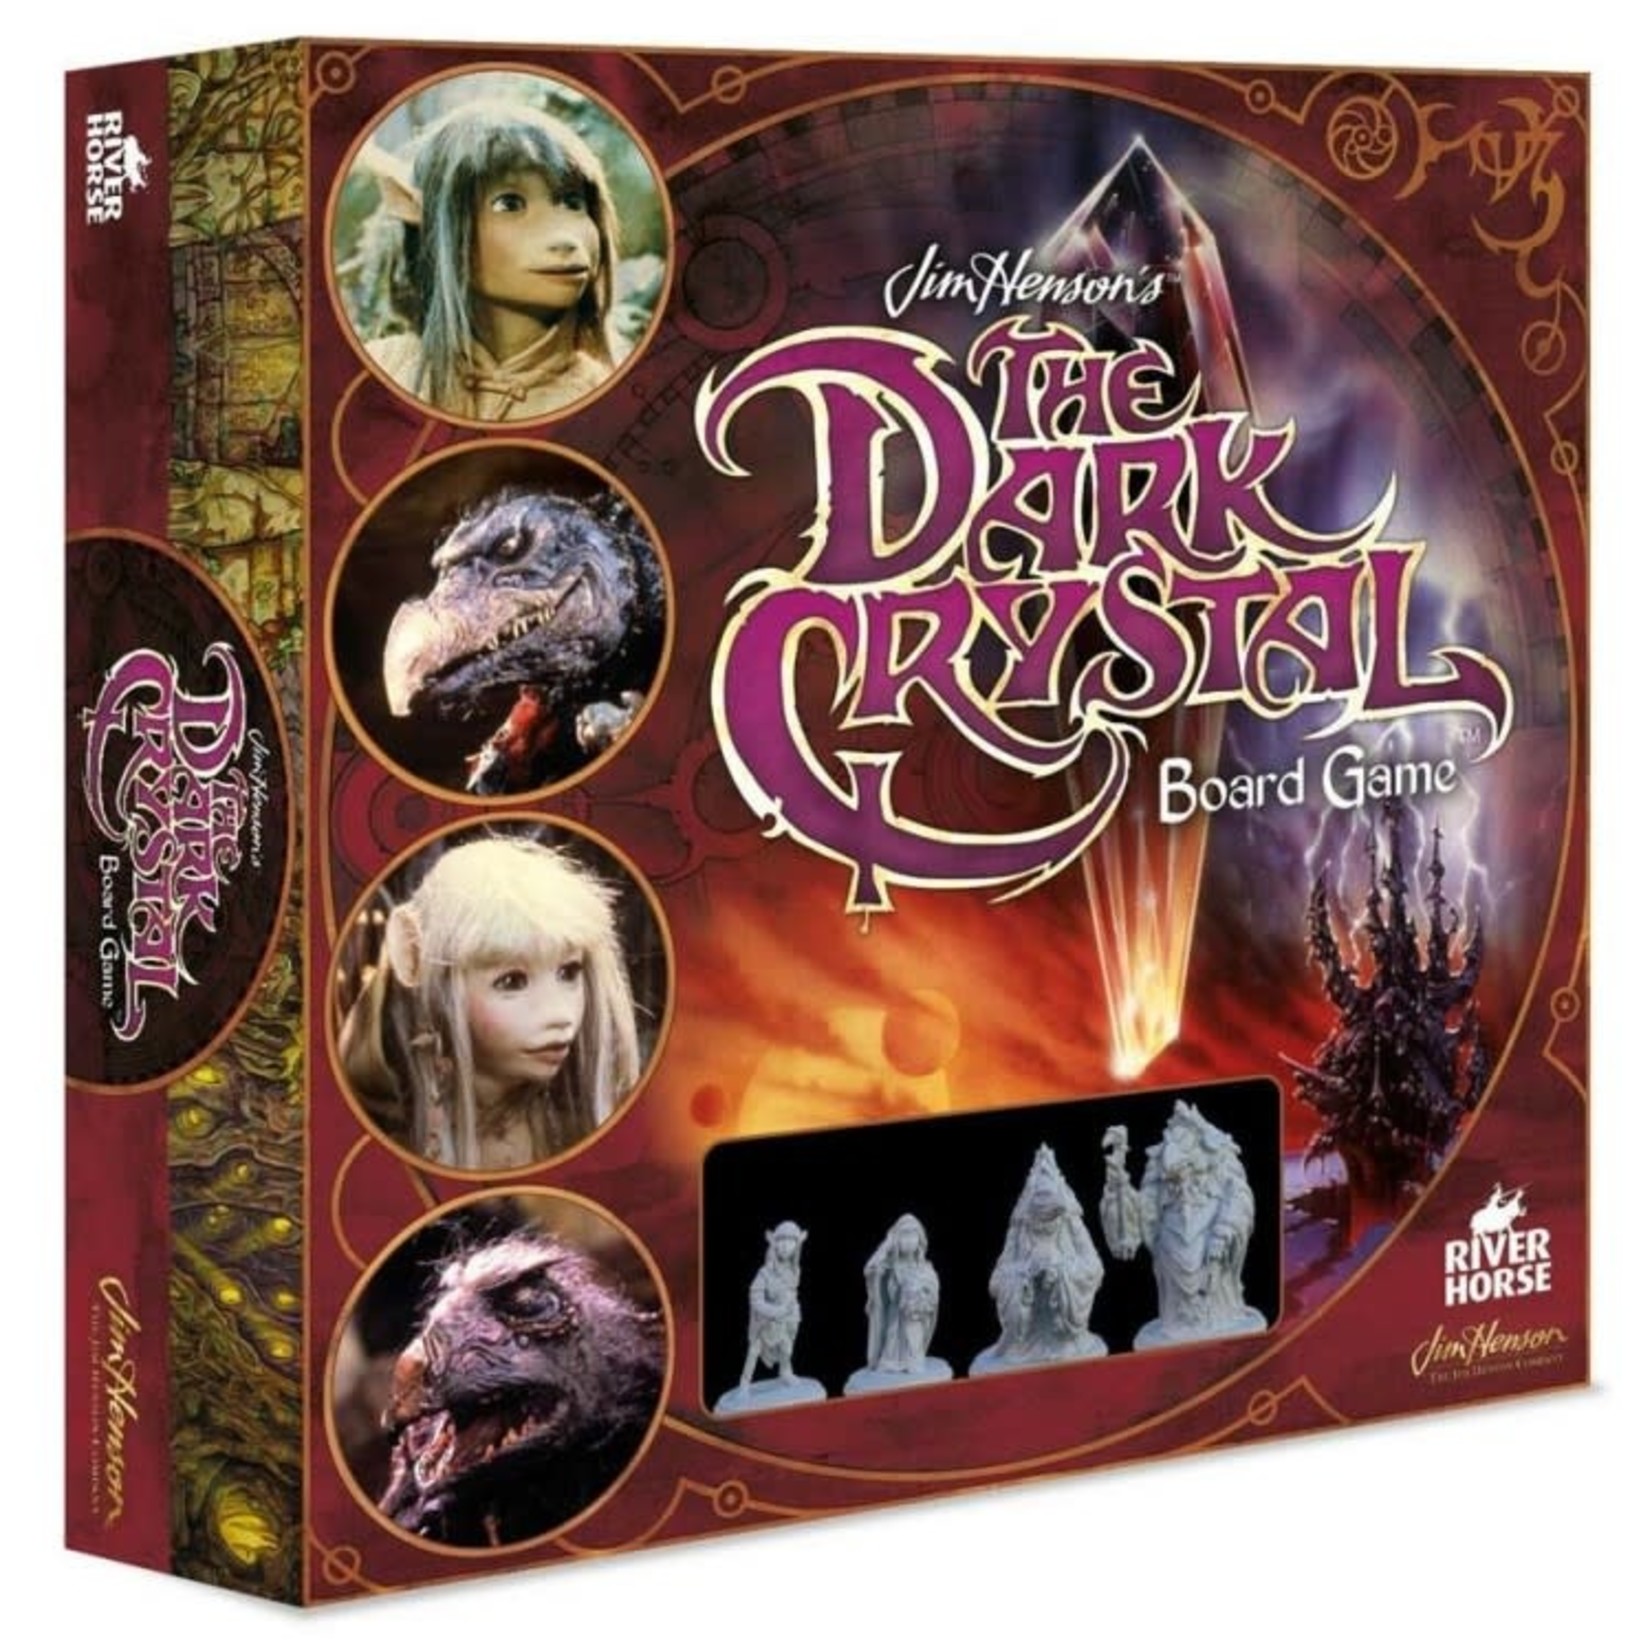 River Horse Jim Henson's The Dark Crystal The Board Game